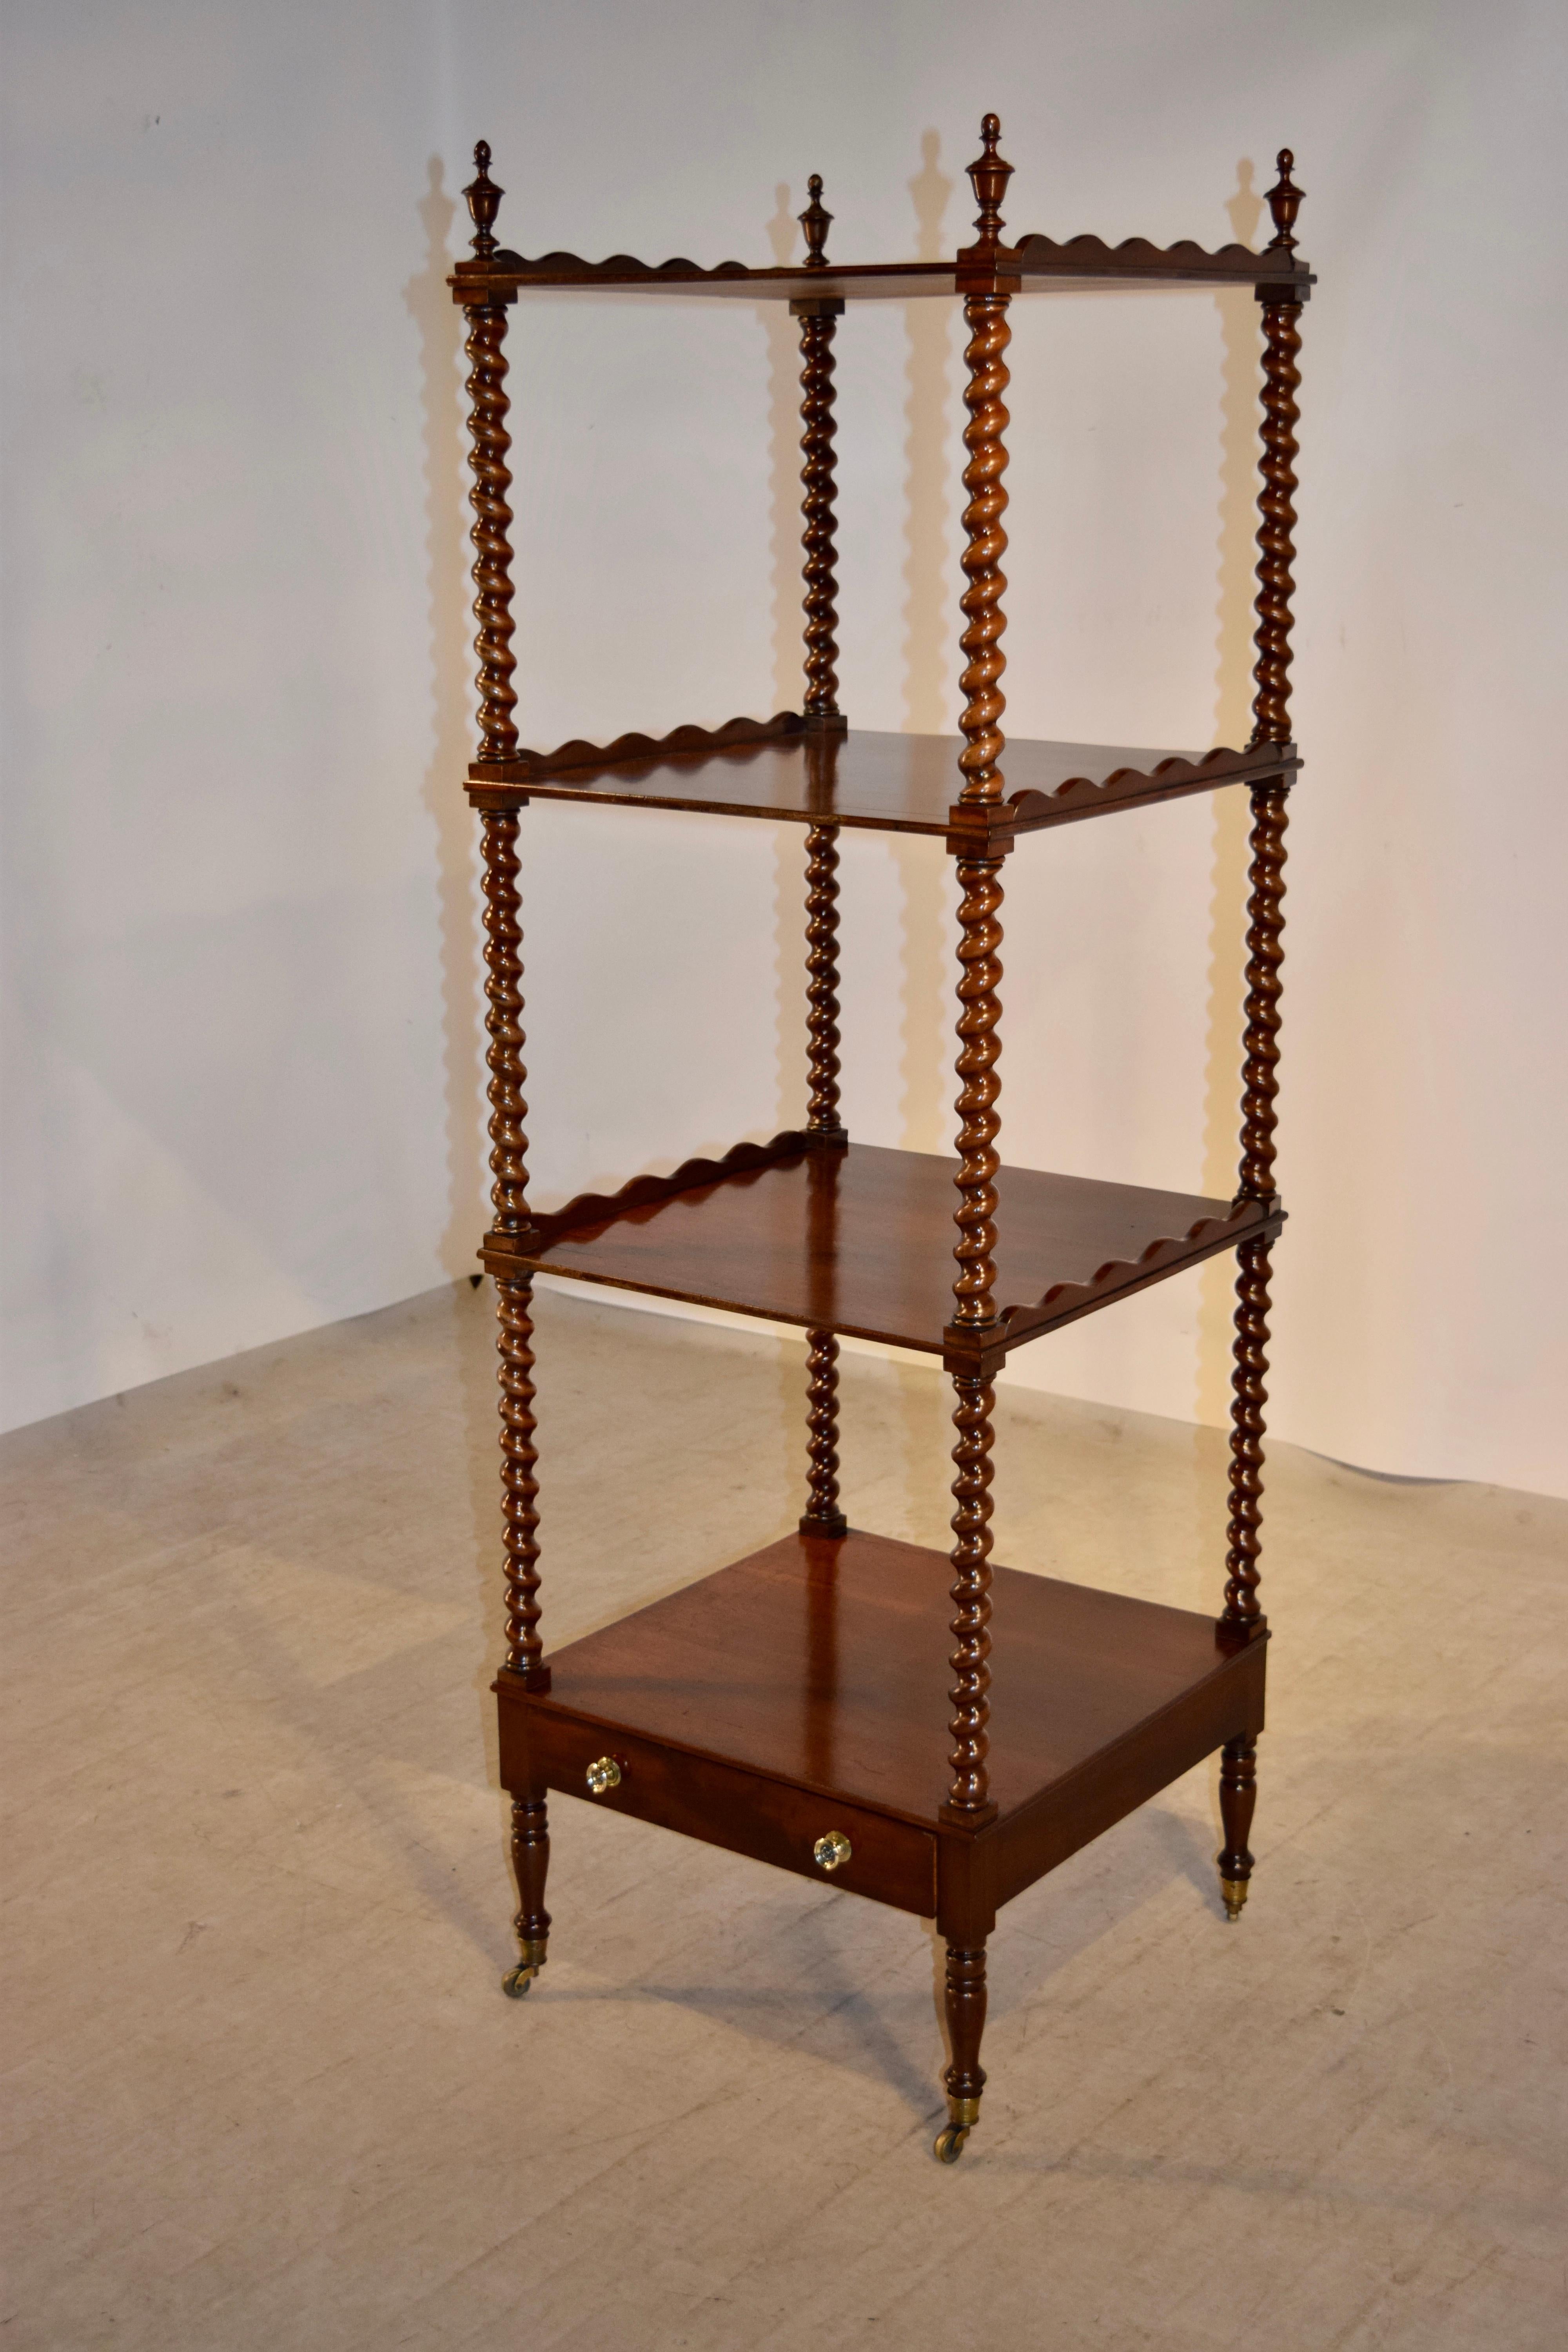 19th century mahogany whatnot from England with four shelves which have scalloped galleries on the sides and are separated by hand turned barley twist shelf supports. There is a single drawer and the piece is raised on hand turned legs with lovely